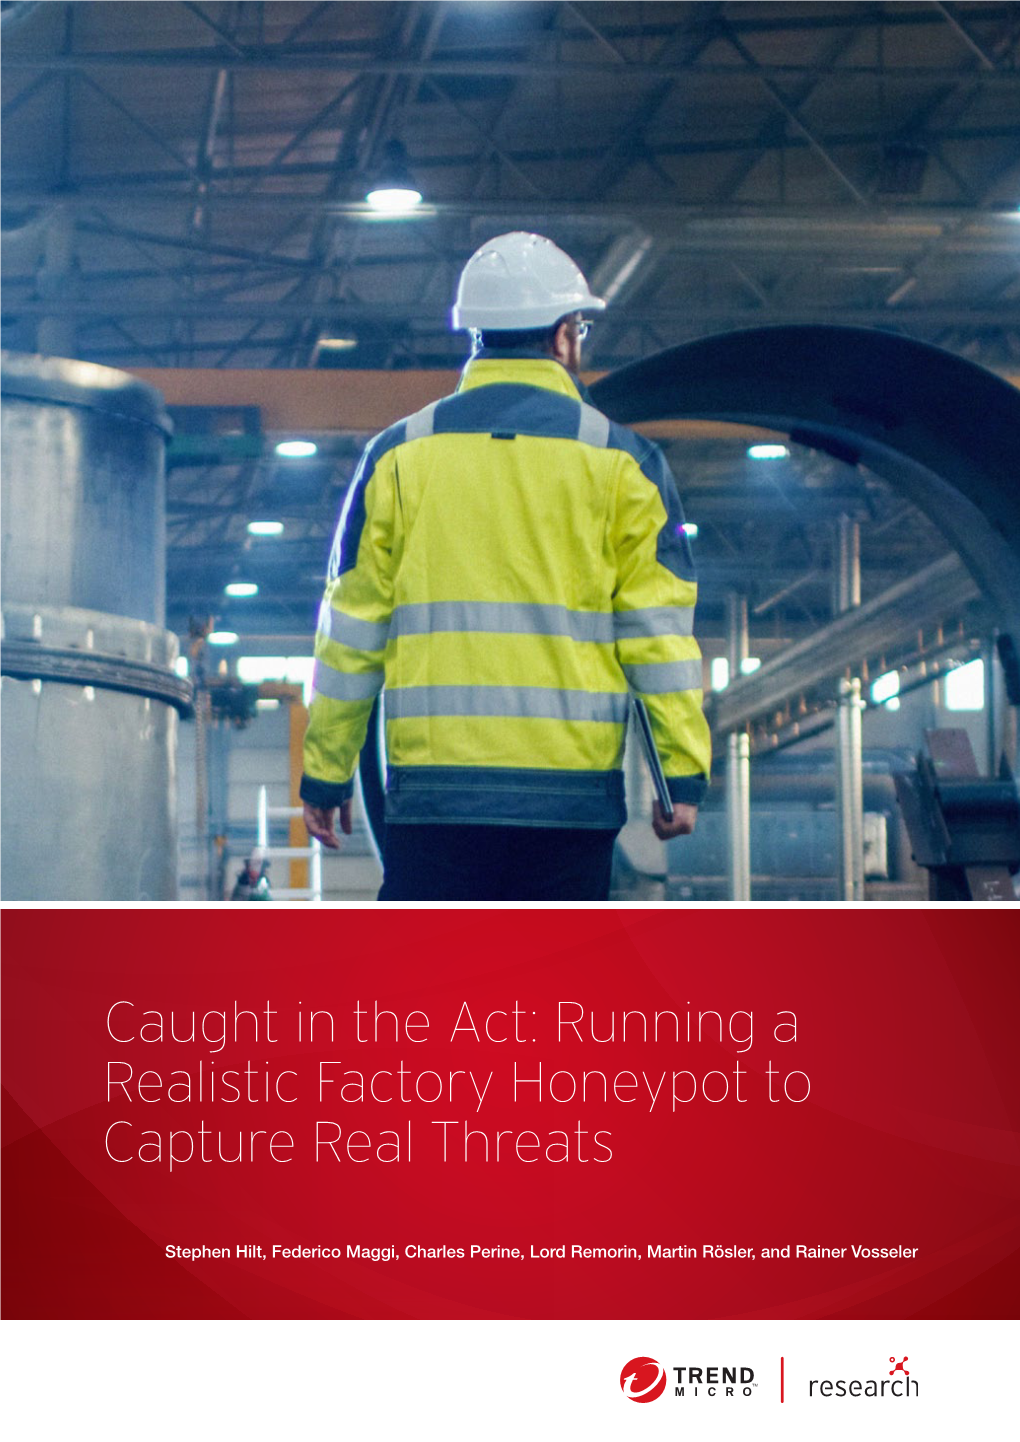 Caught in the Act: Running a Realistic Factory Honeypot to Capture Real Threats